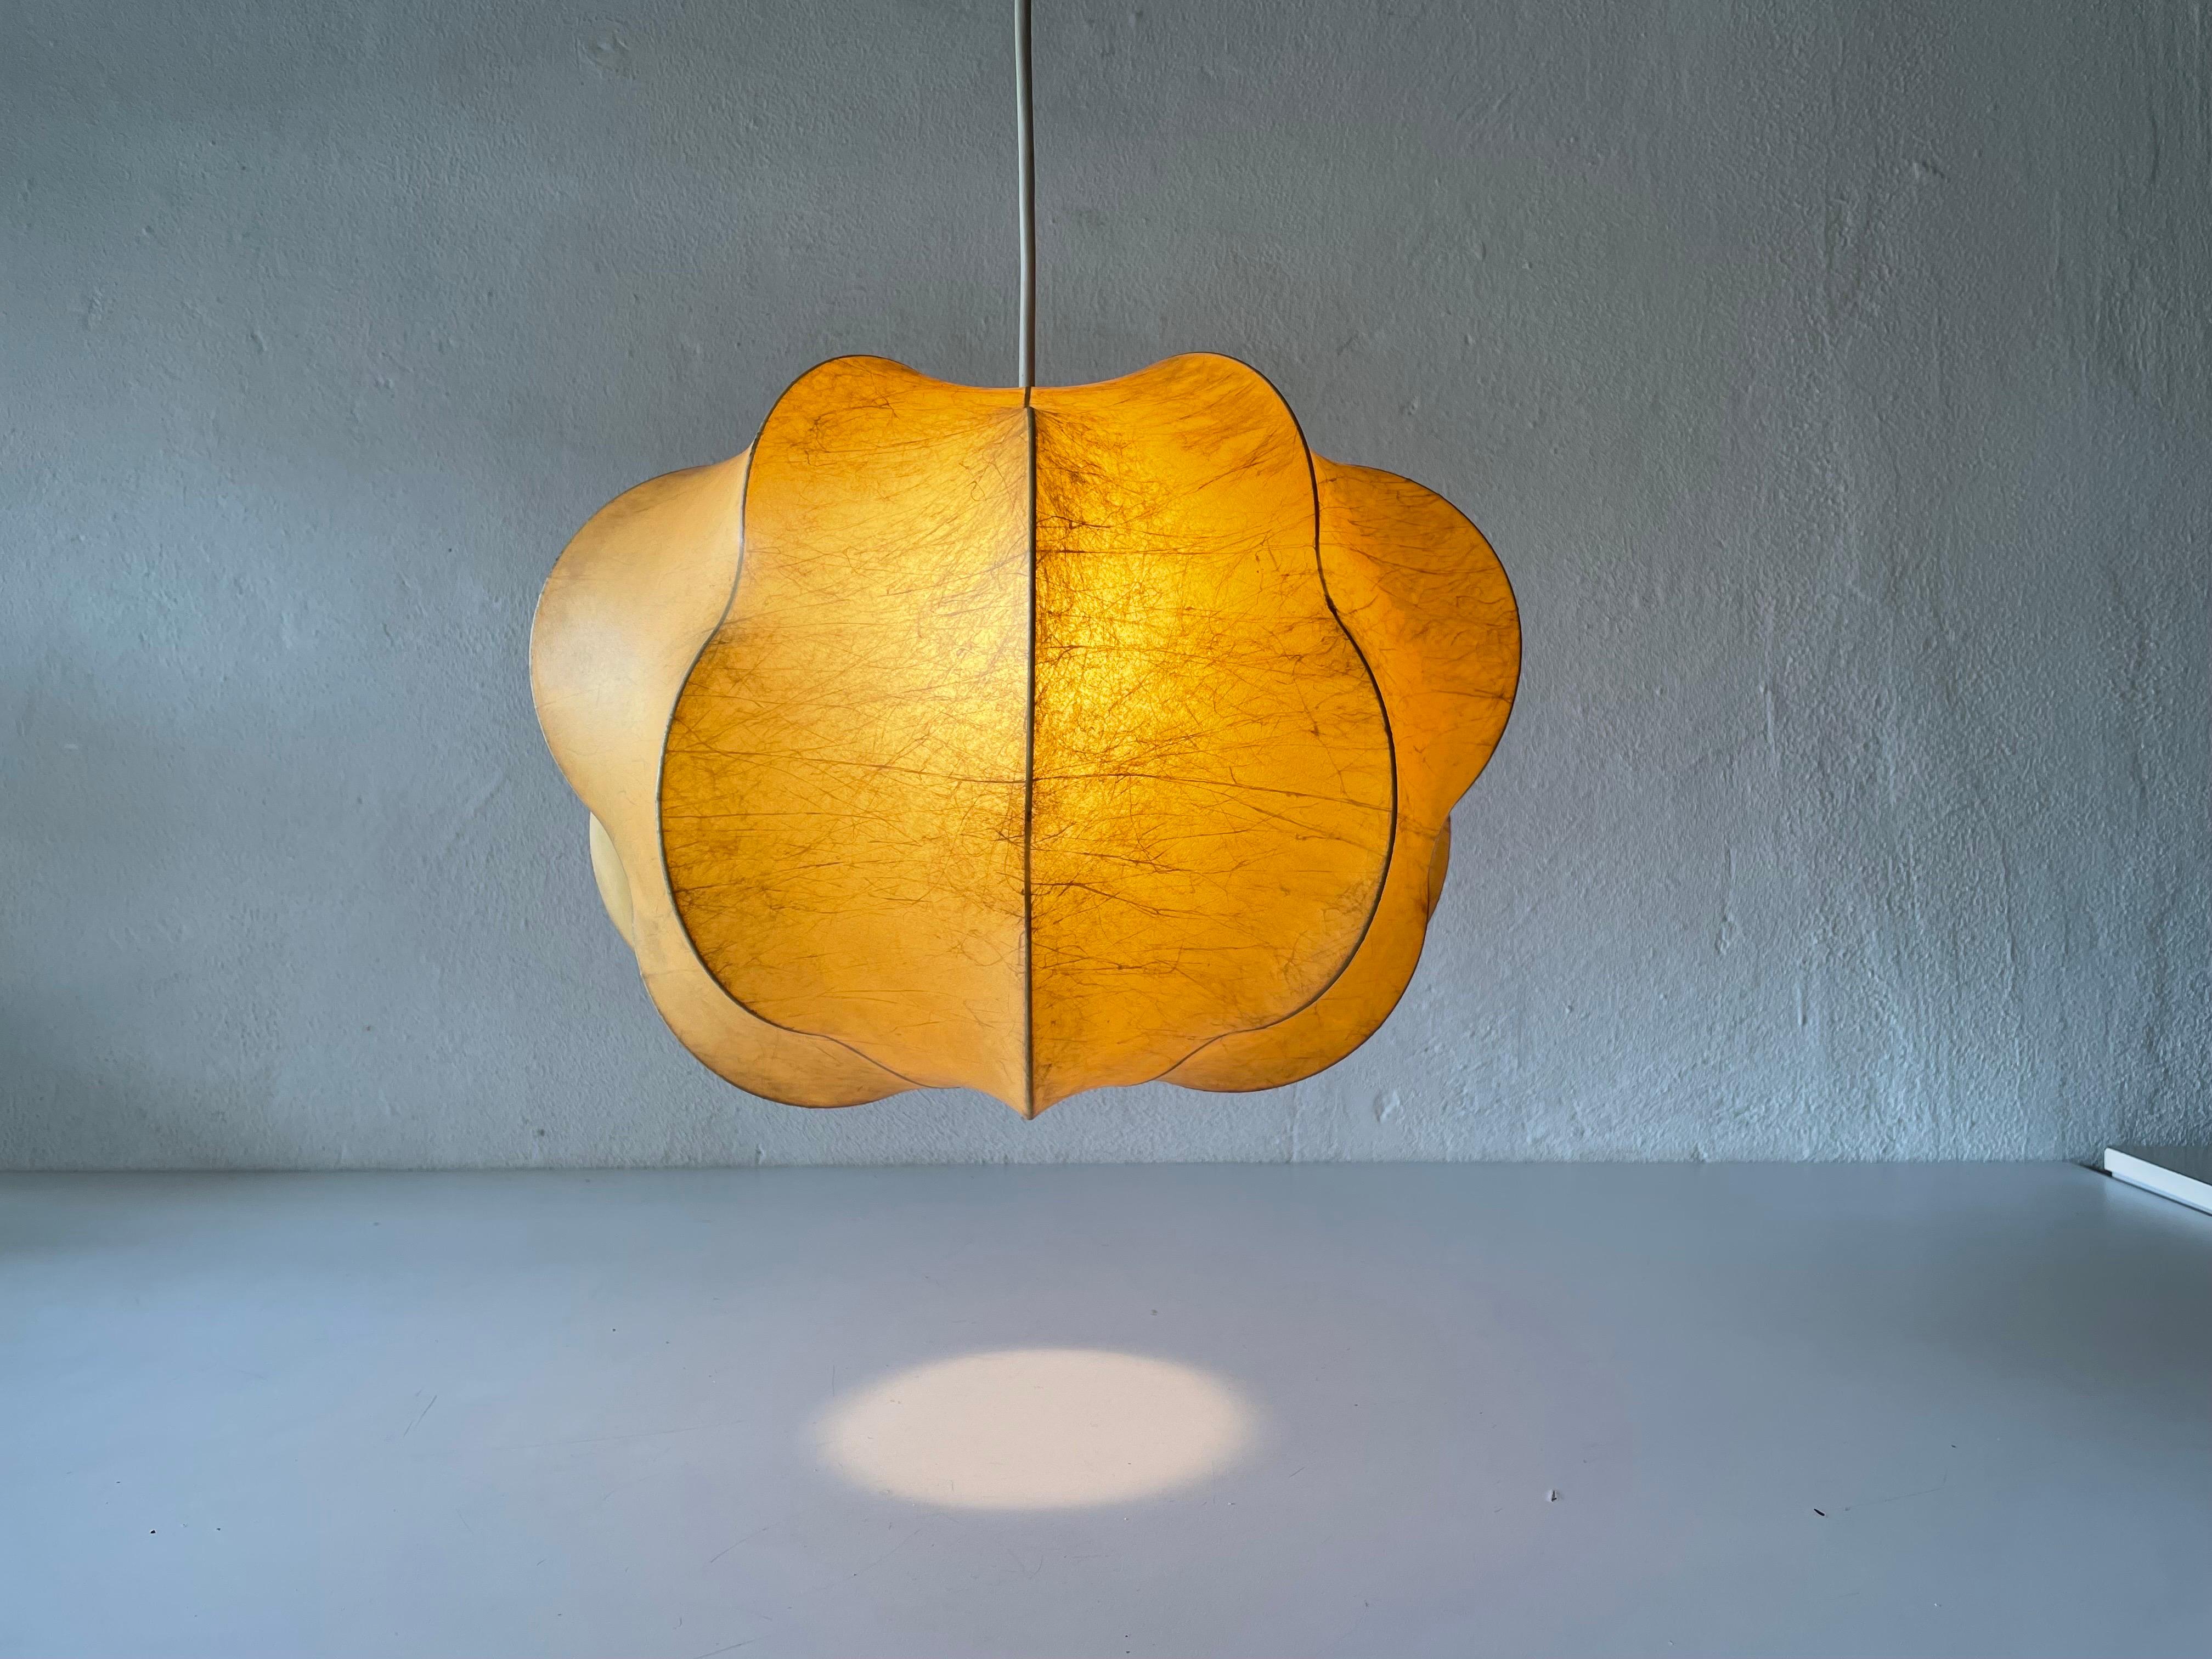 Resin Nuvola Model Cocoon Suspension Lamp by Tobia Scarpa for Flos, 1960s, Italy